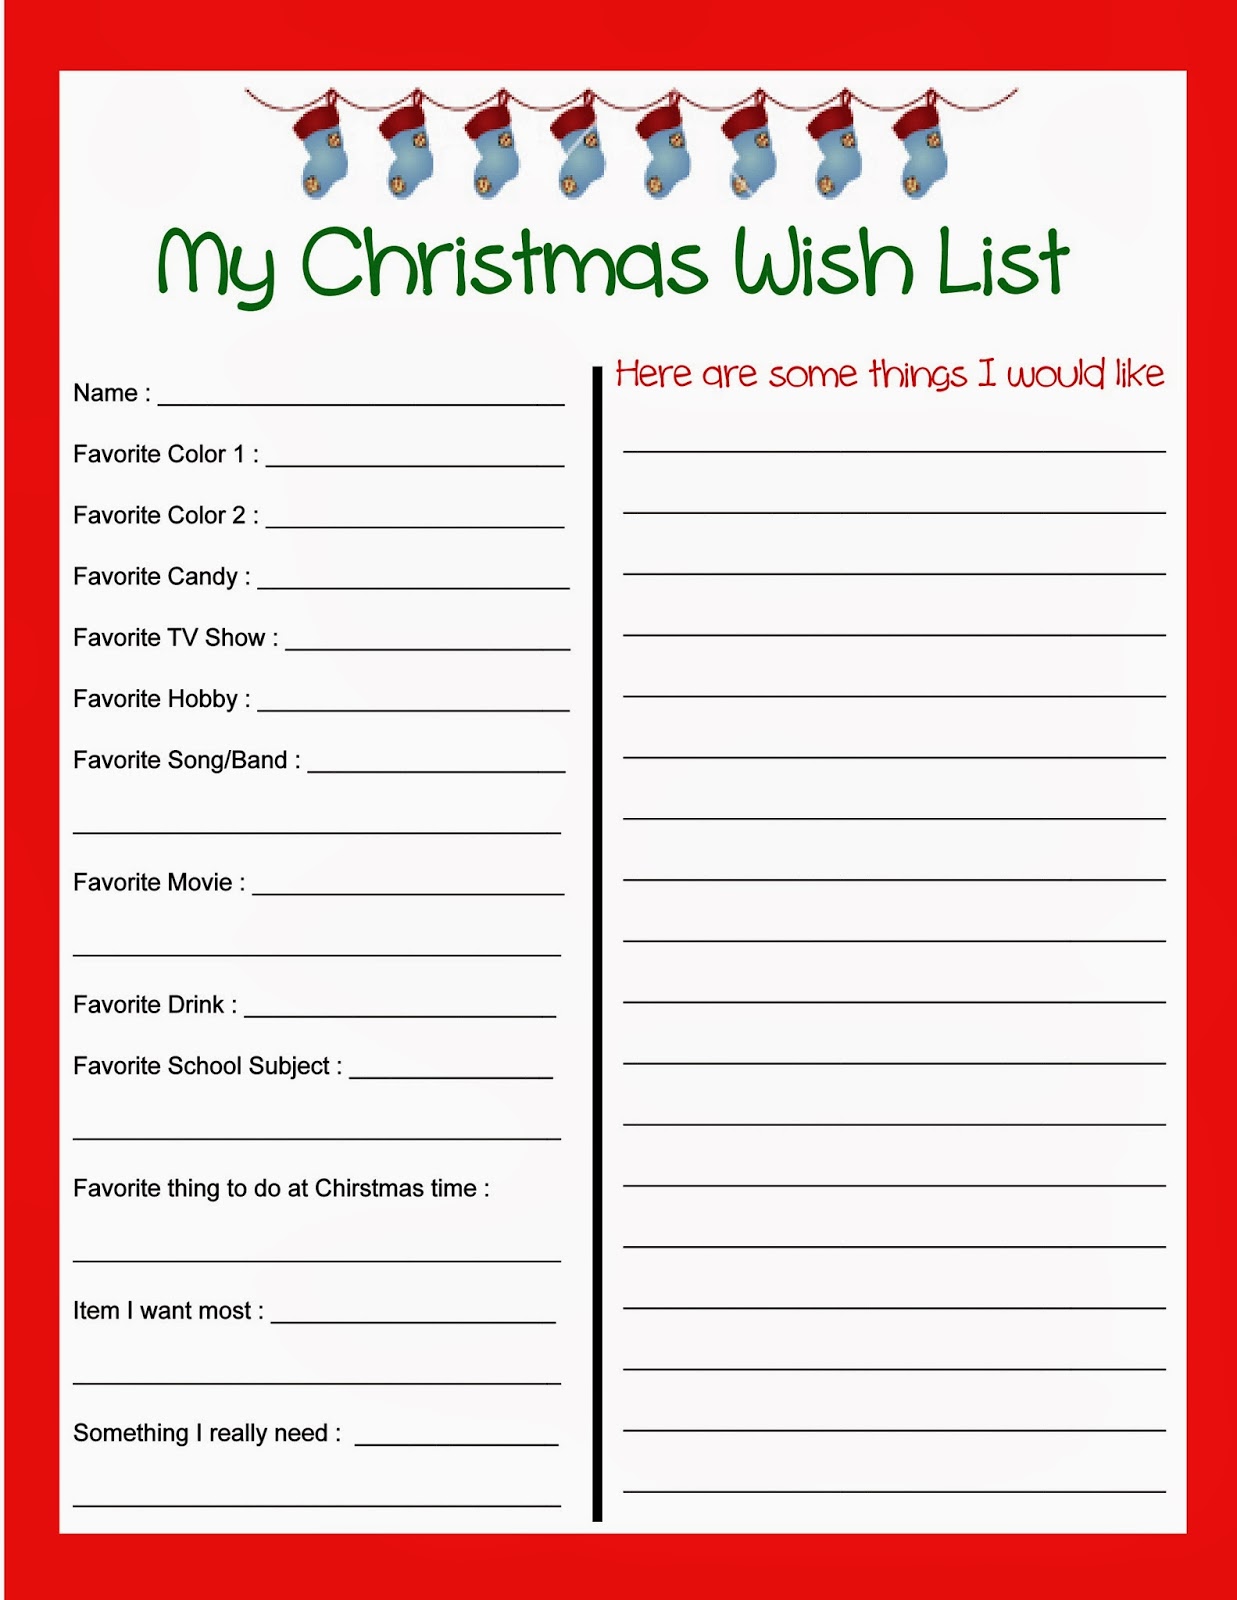 6-best-images-of-printable-christmas-gift-wish-list-blank-christmas-wish-list-printable-free